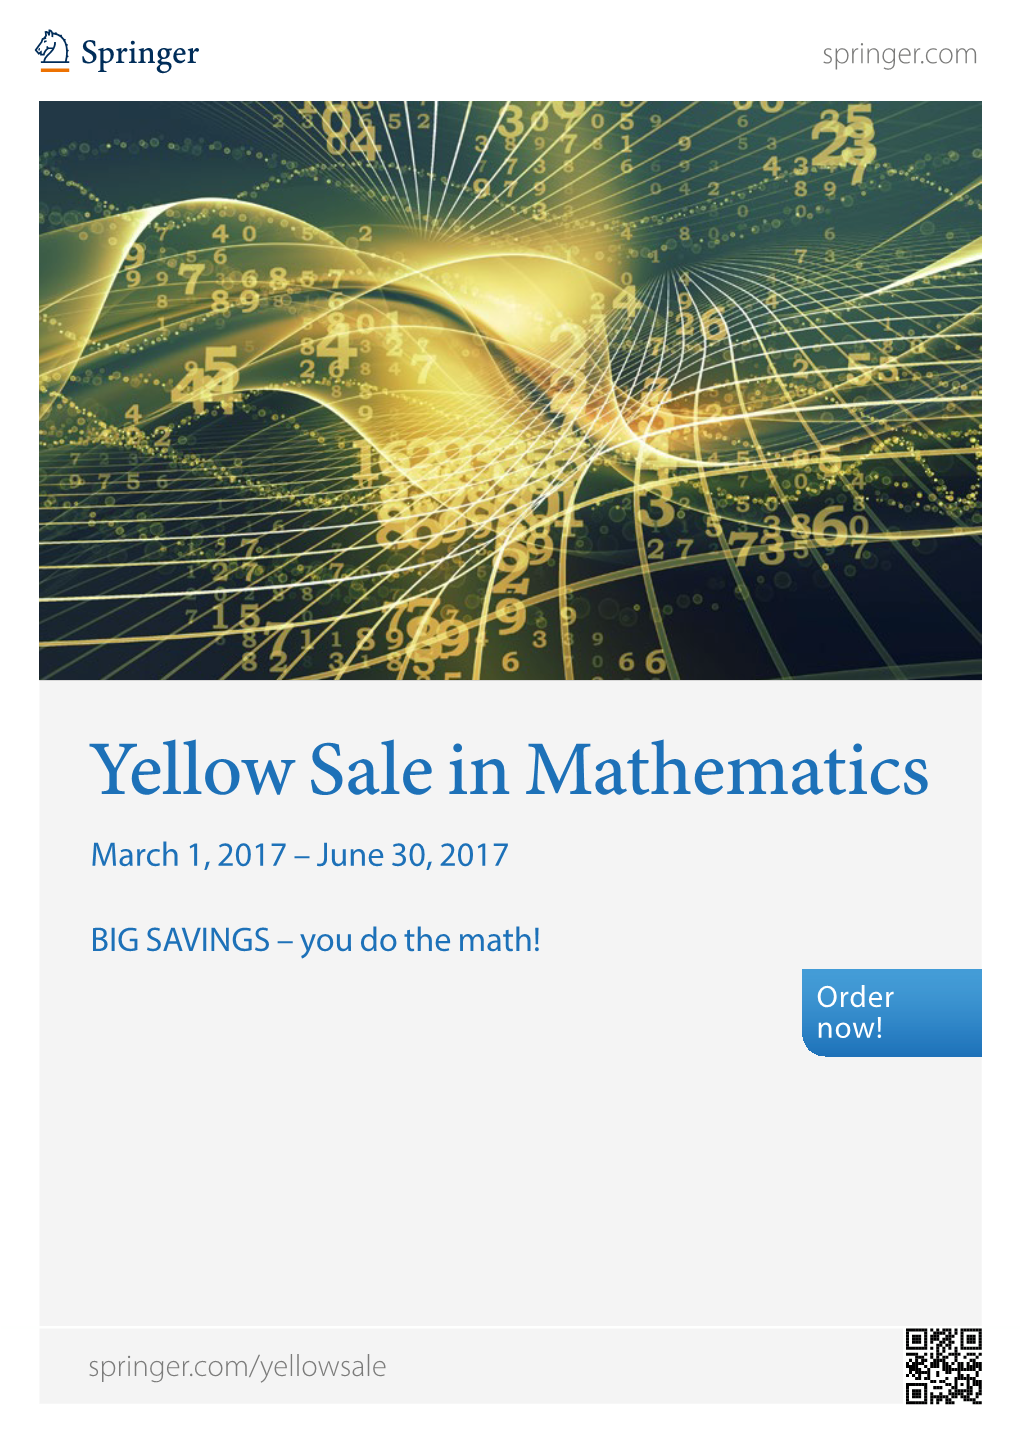 Yellow Sale in Mathematics Springer Healthcare March 1, 2017 – June 30, 2017 Praxis